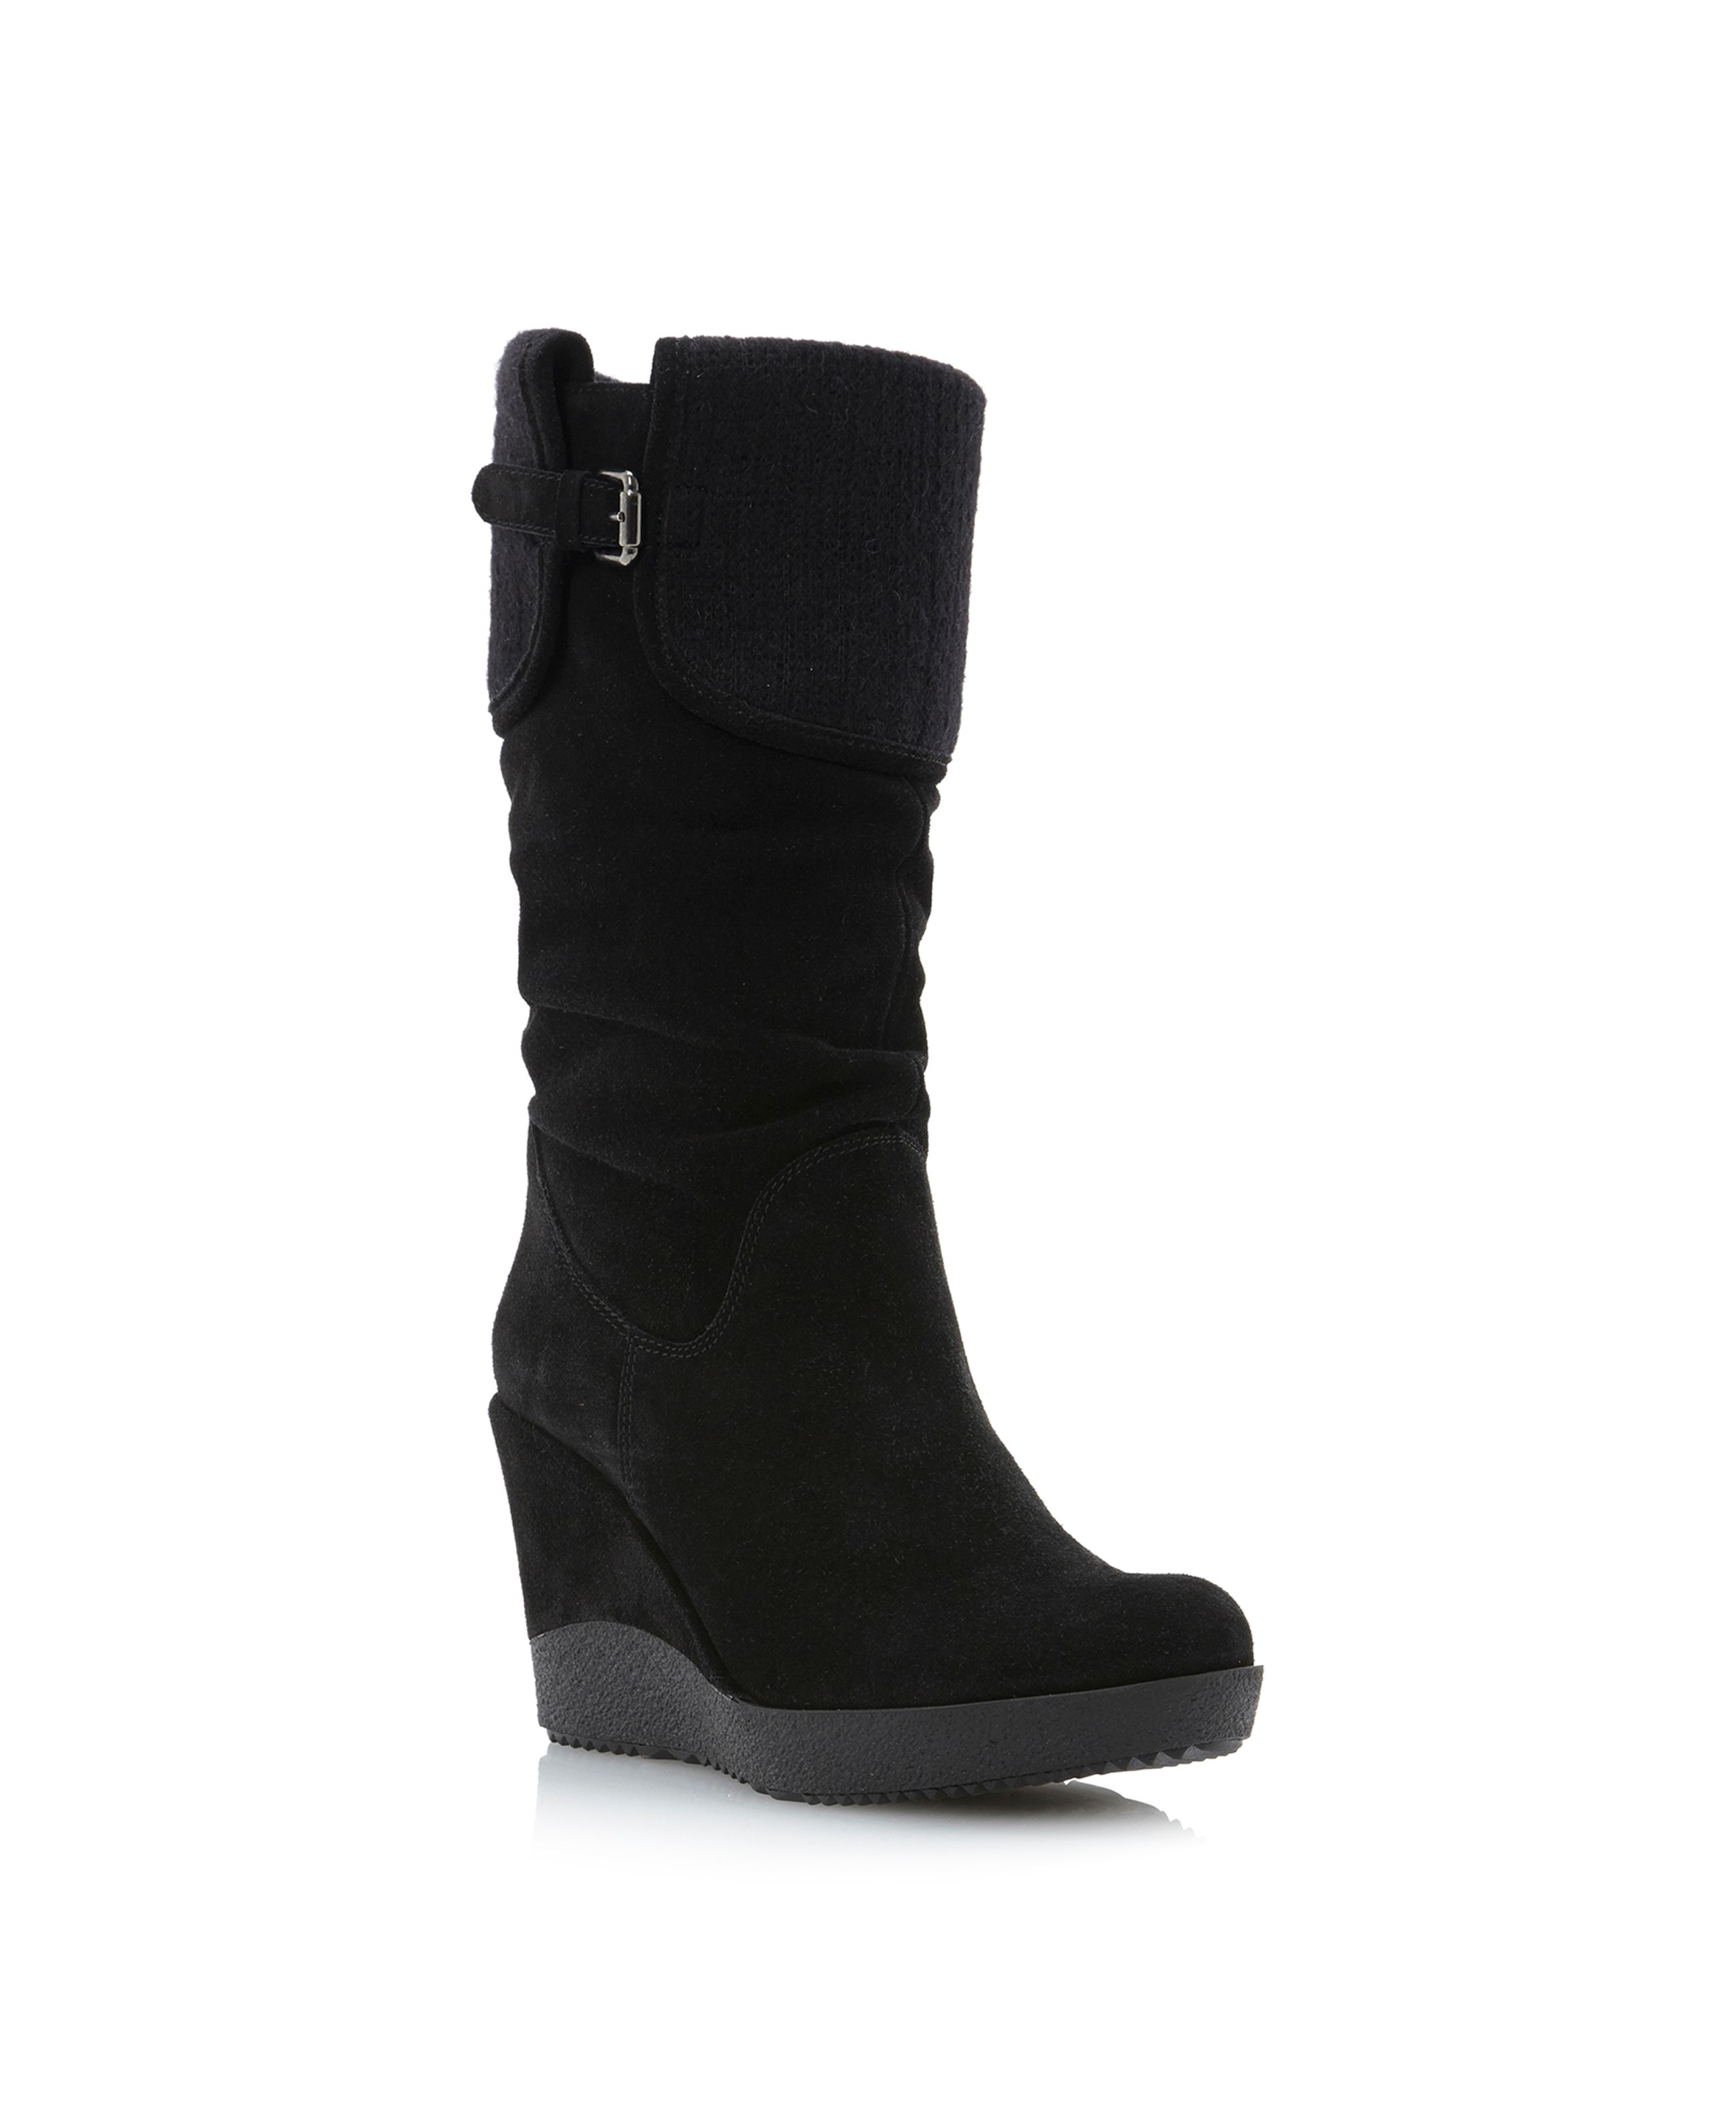 Dune Romas Fold Over Fabric Cuff Boots in Black (Black Suede) | Lyst